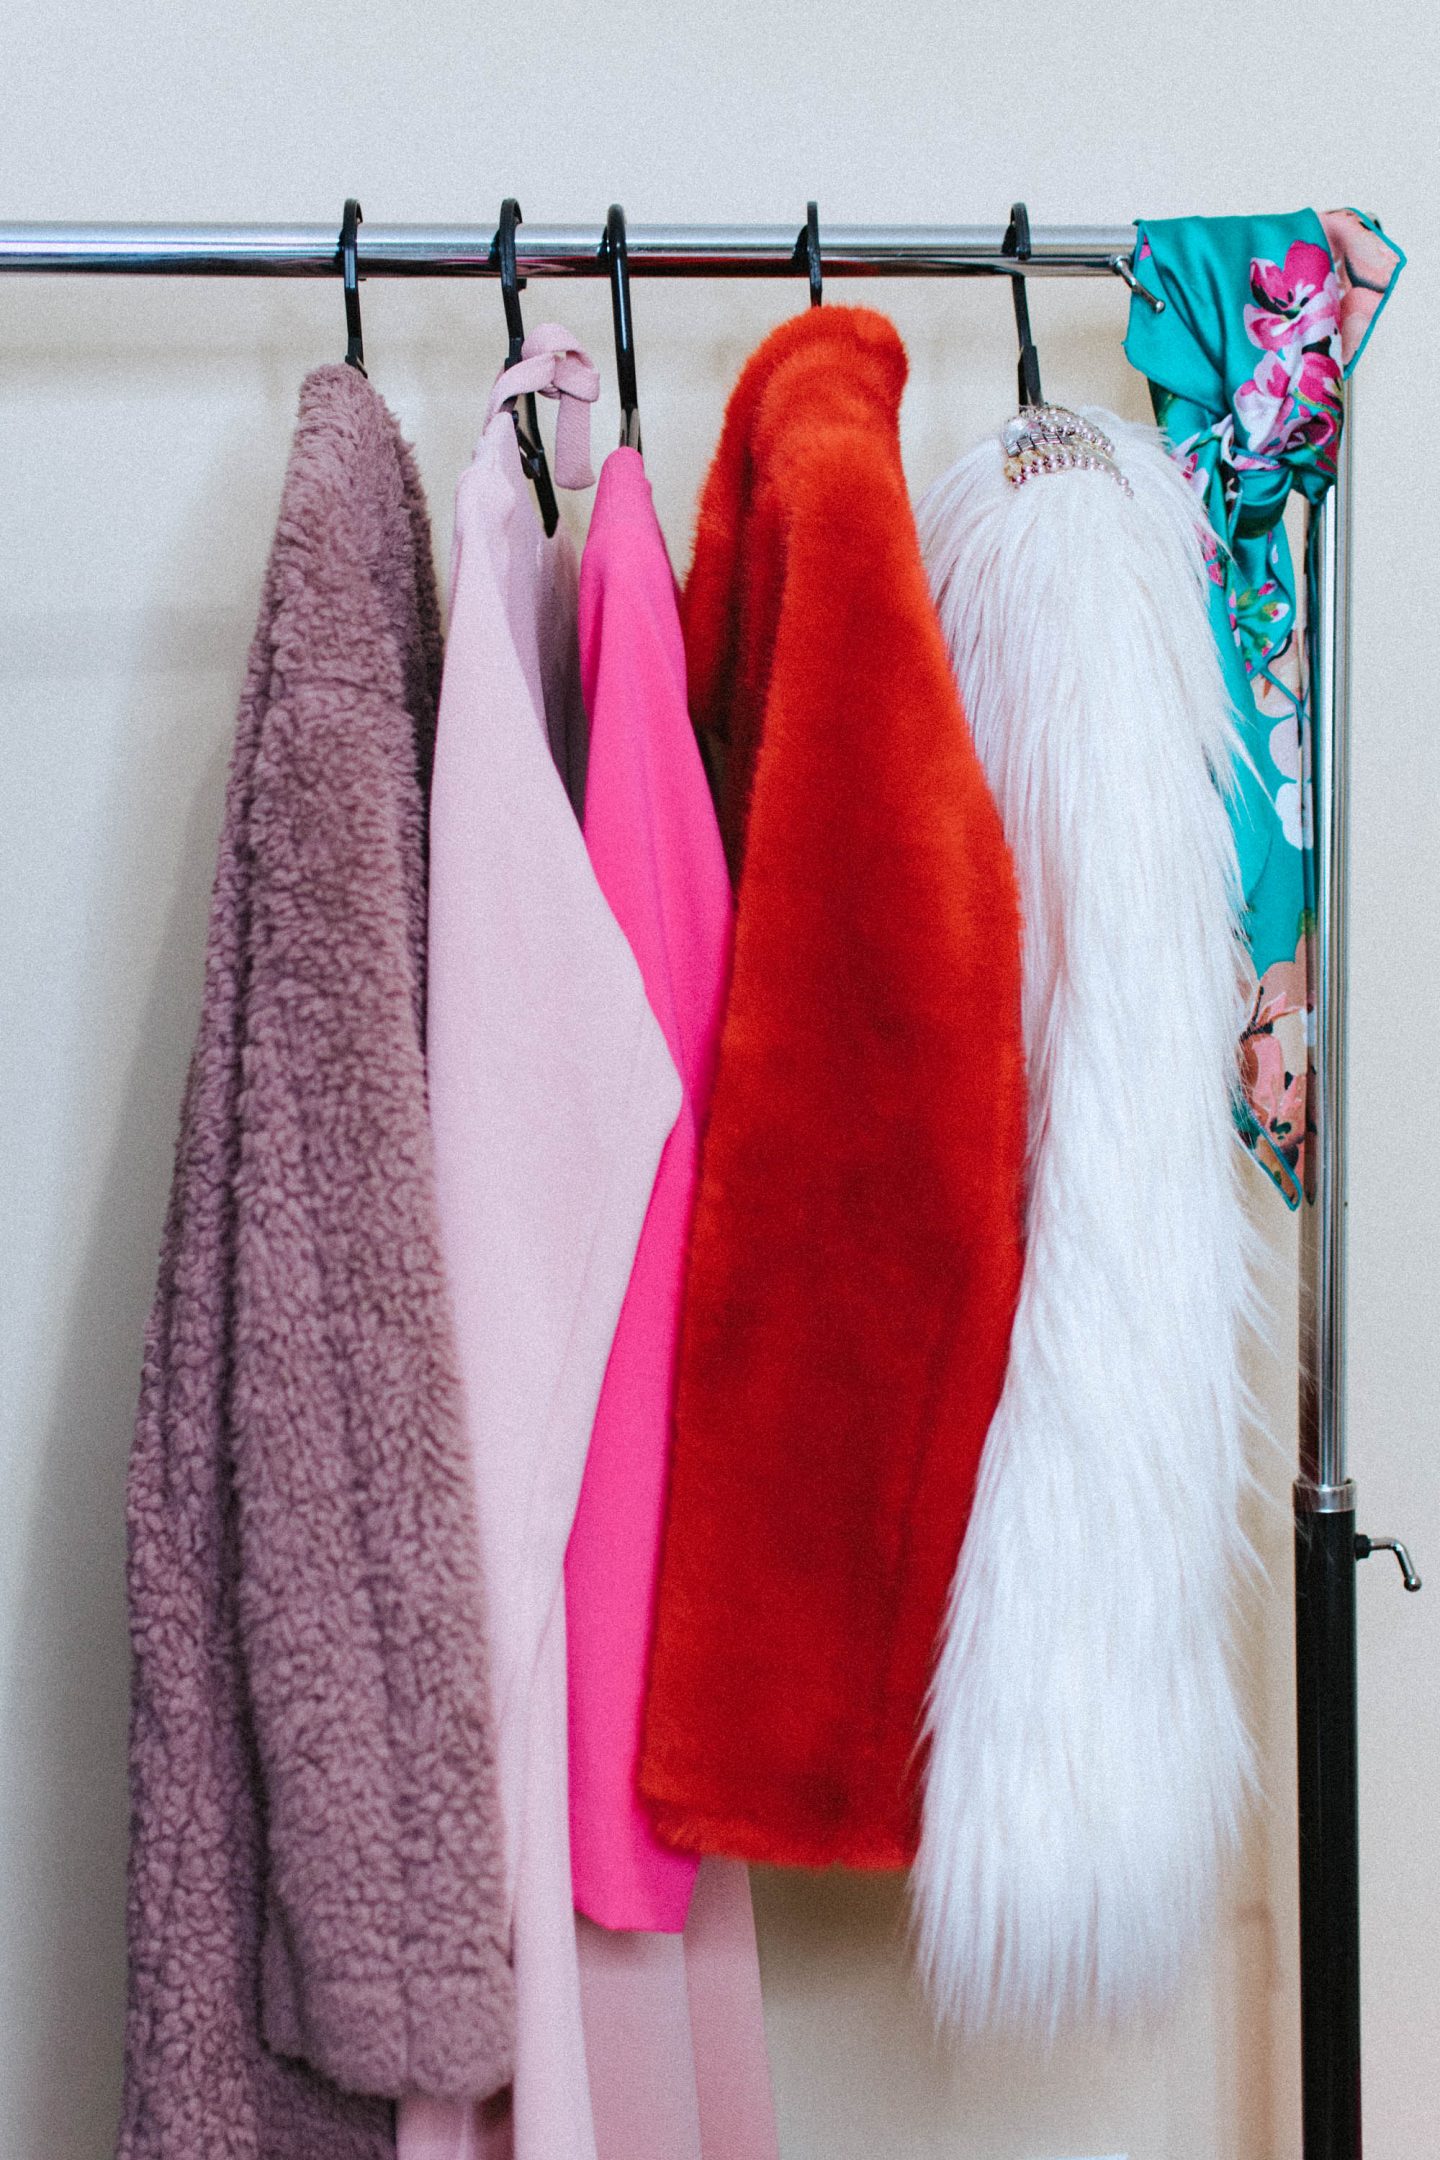 Doing a closet purge can help get rid of pieces you don't wear to make room for more